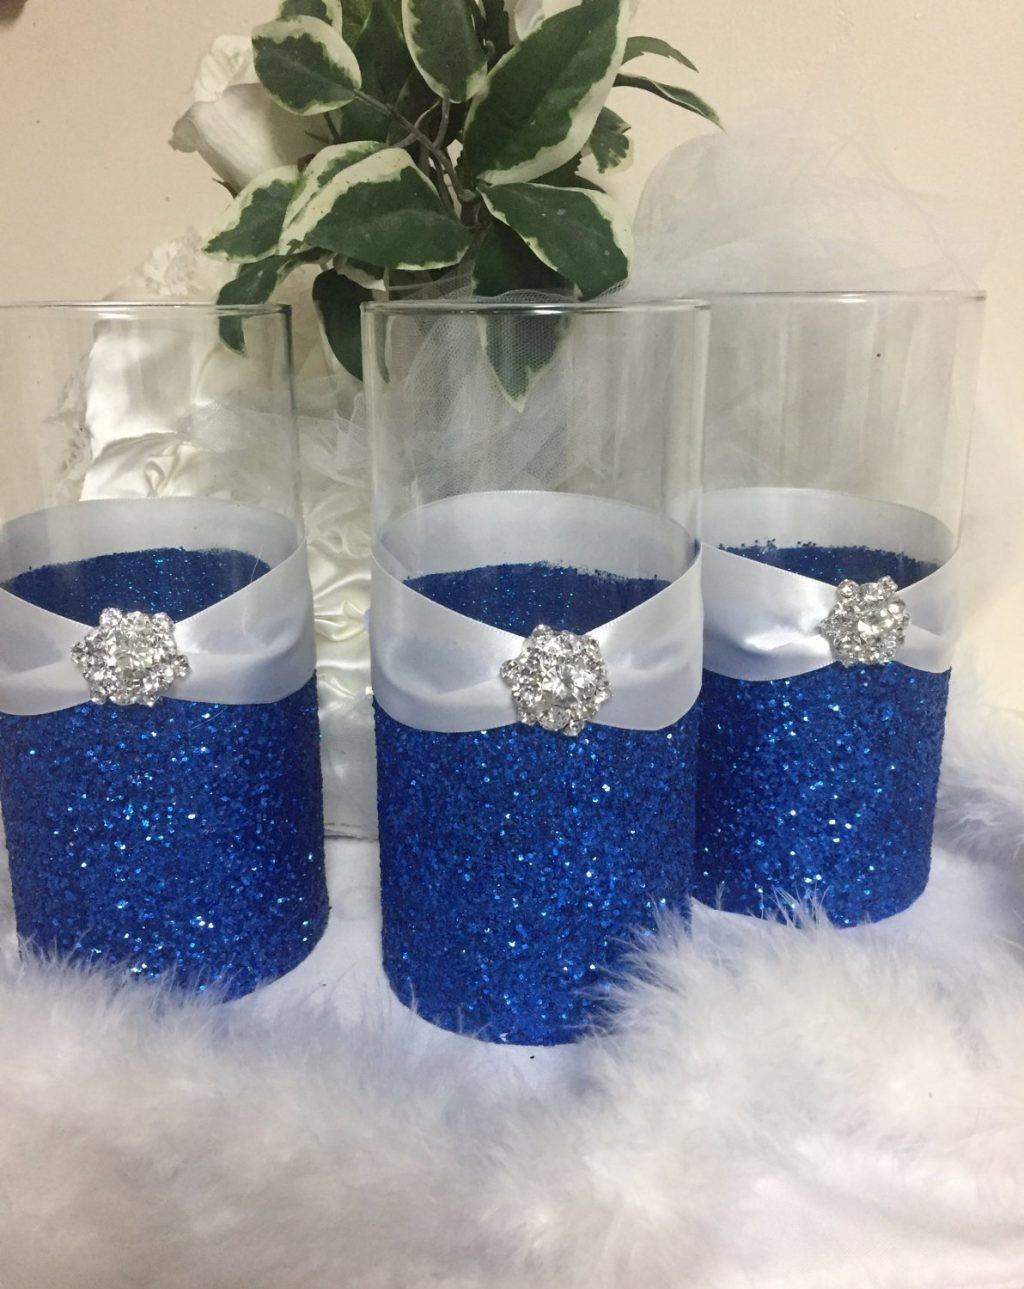 19 attractive Vases Table Centerpieces 2024 free download vases table centerpieces of wedding decorations centerpieces beautiful tallh vases glitter vase throughout wedding decorations centerpieces beautiful tallh vases glitter vase centerpiece diy